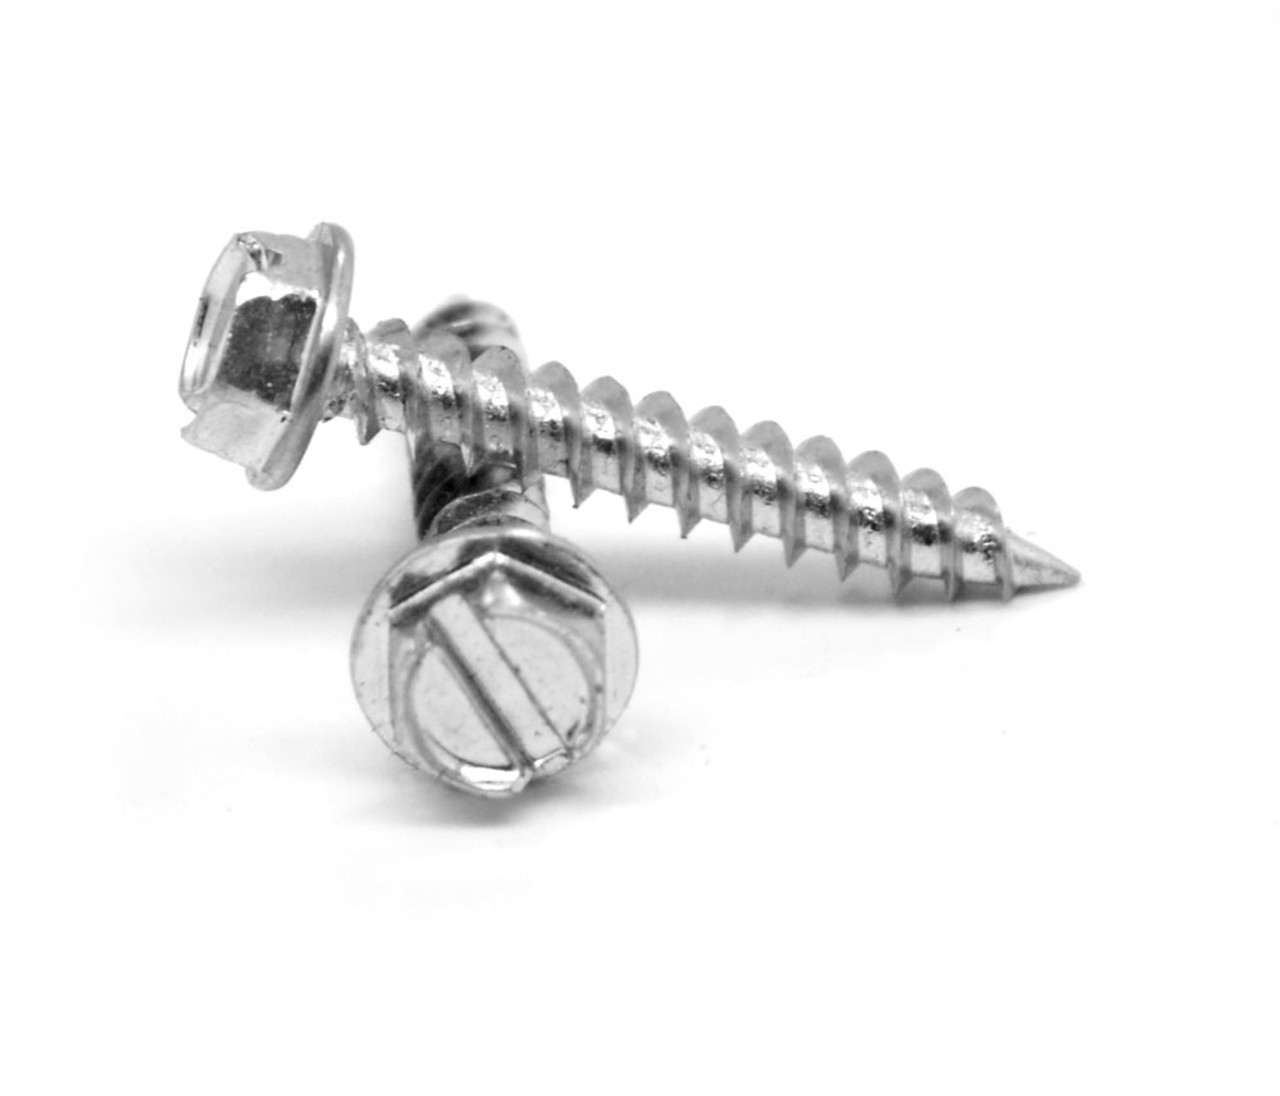 #6-18 x 3/4" (FT) 1/4" AF Self-Piercing Sheet Metal Screw Slotted Hex Washer Head Low Carbon Steel Zinc Plated